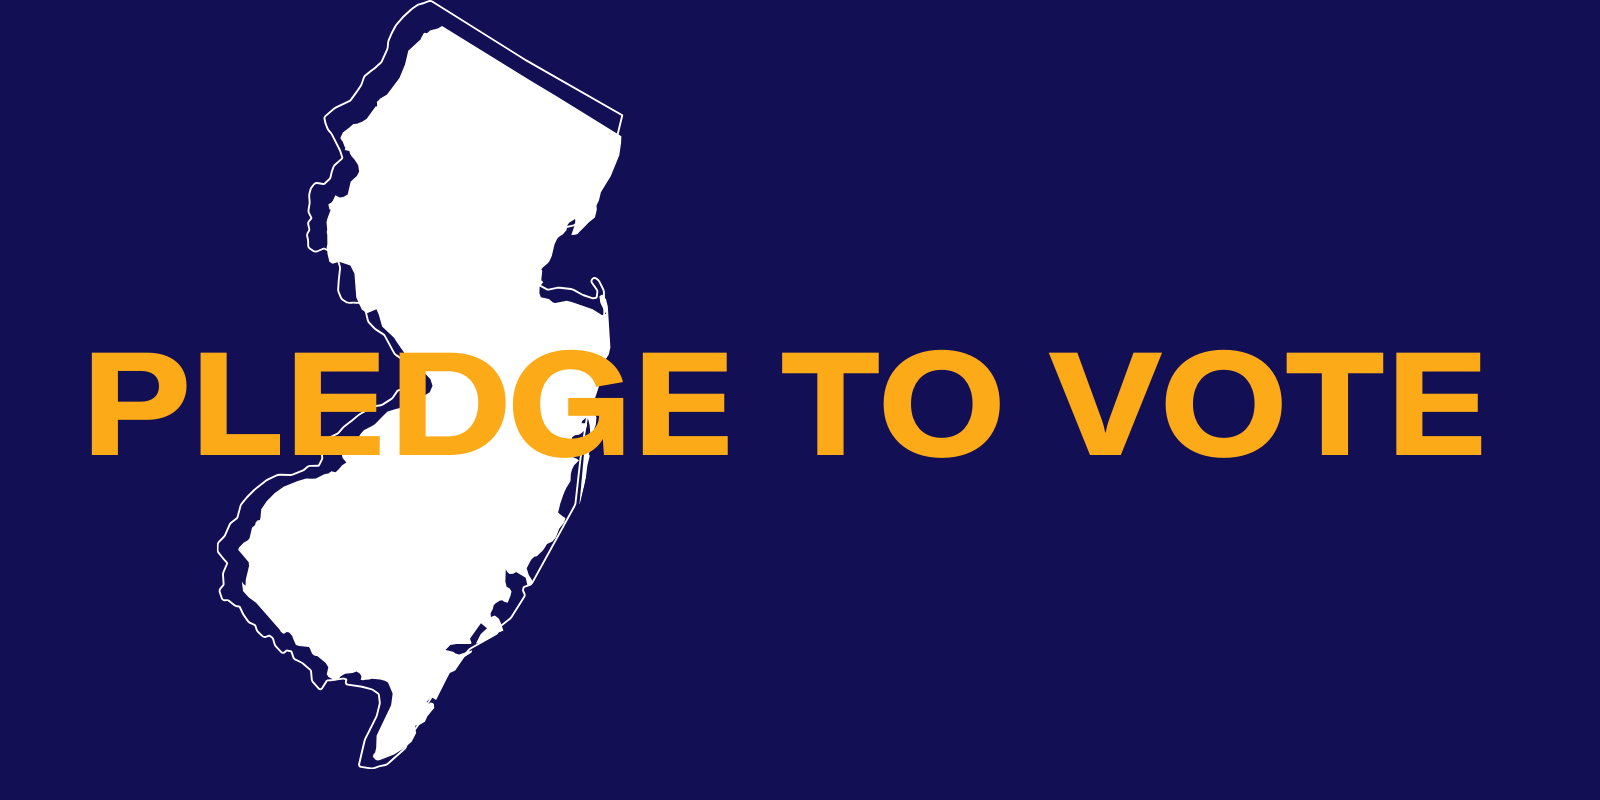 Pledge to Vote in yellow text on a blue background